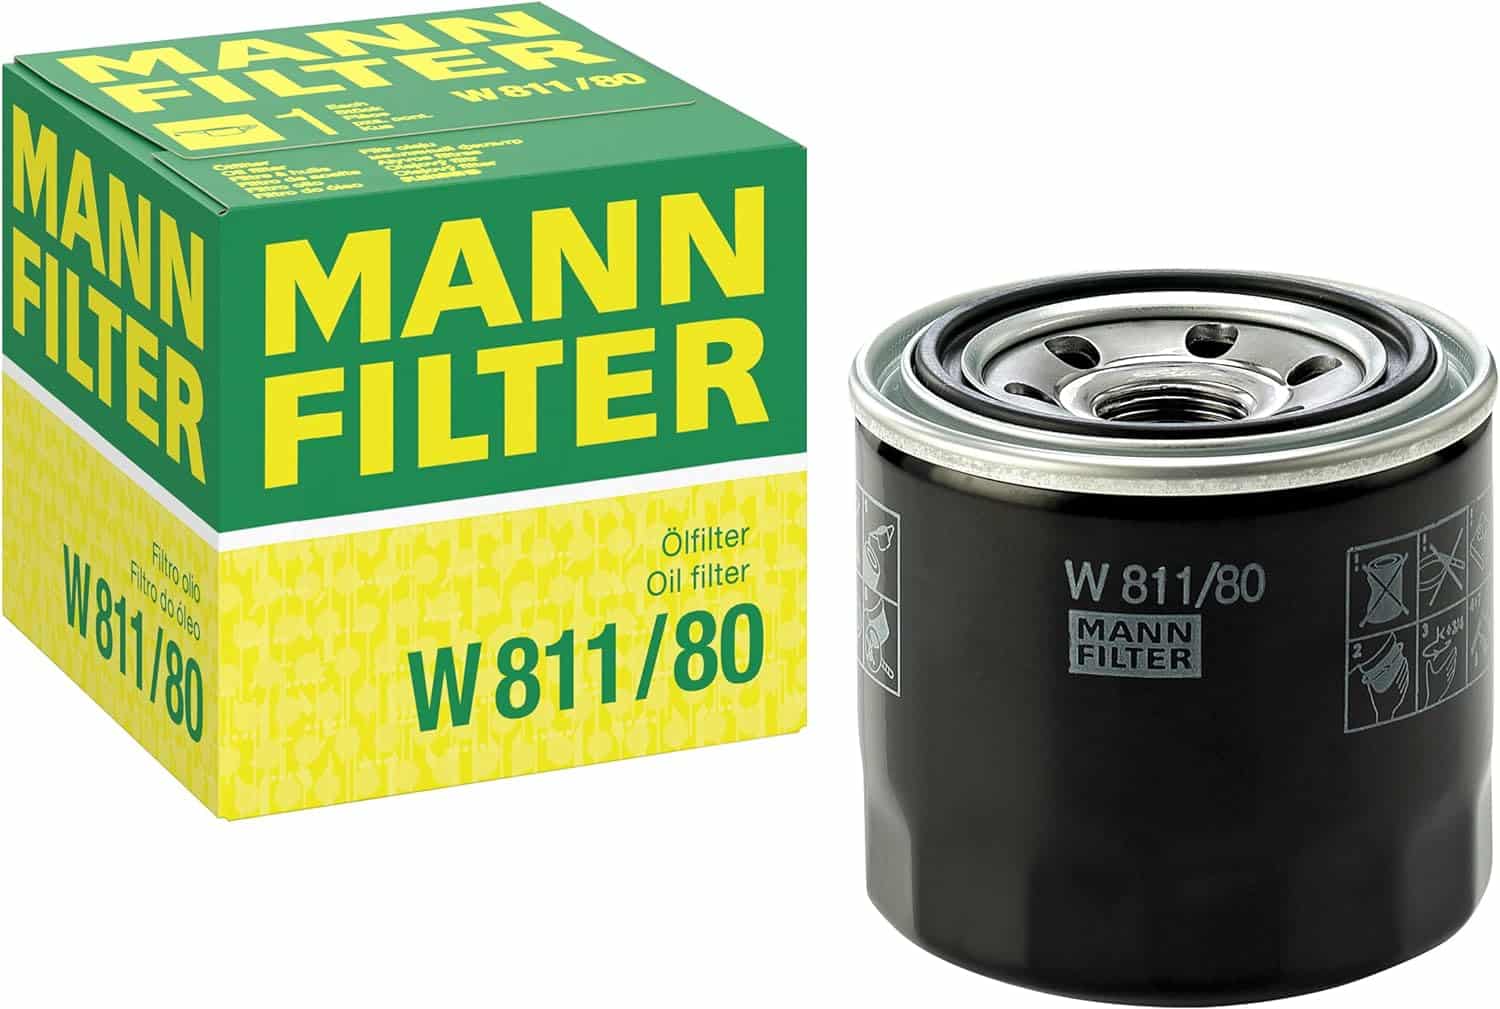 MANN-FILTER W 811/80 Oil filter – For Passenger Cars and Utility Vehicles-0001